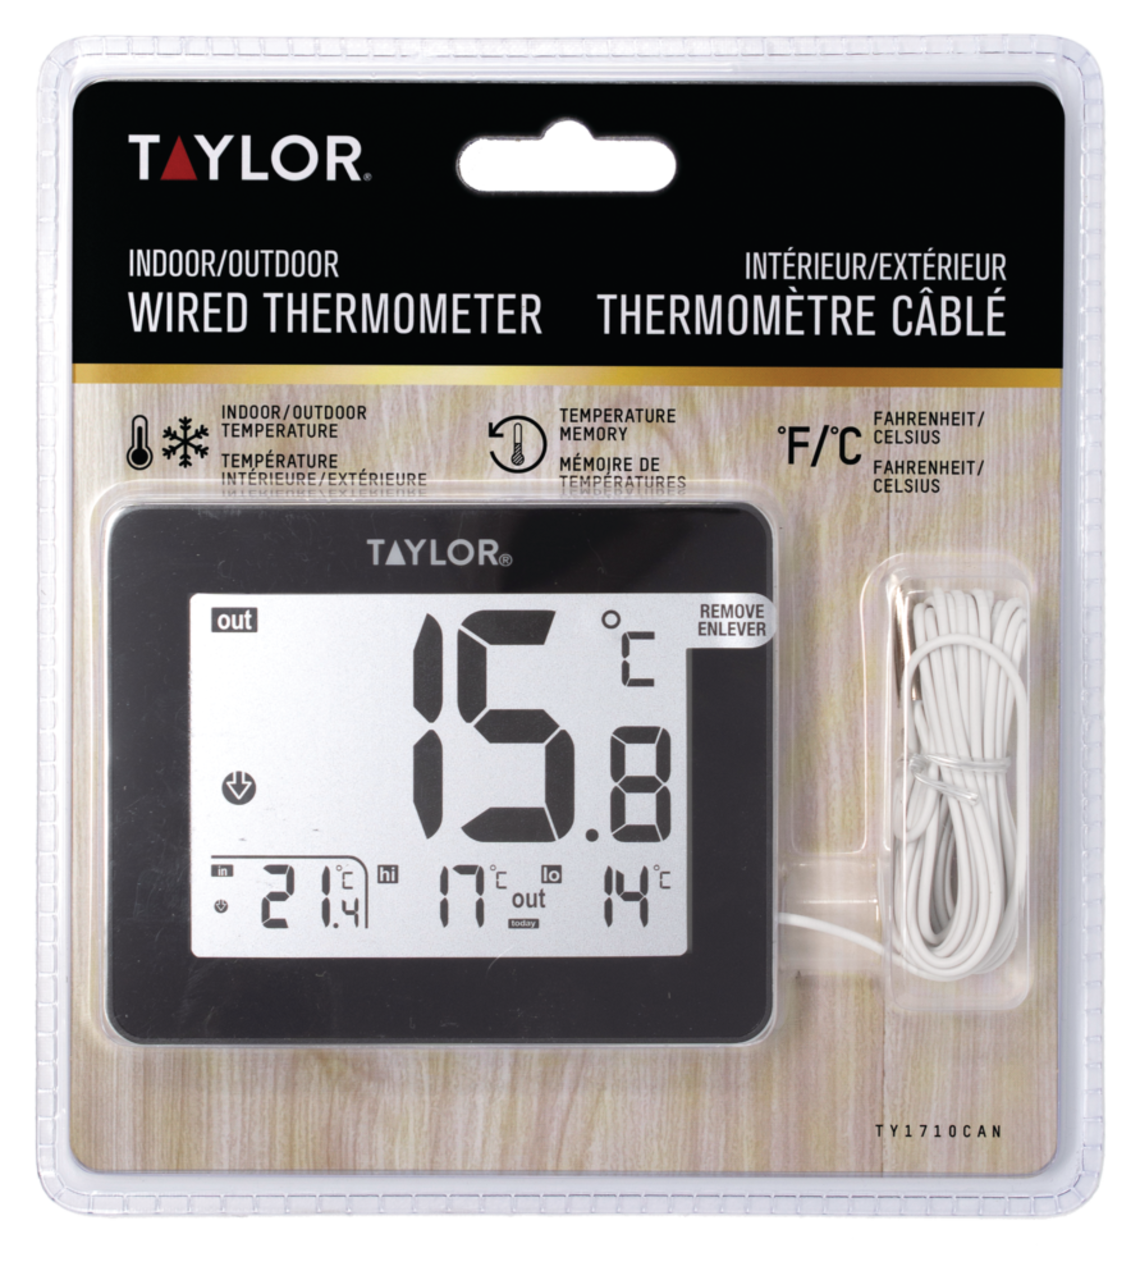 Taylor Wired Indoor/Outdoor Thermometer 1 ea, Shop